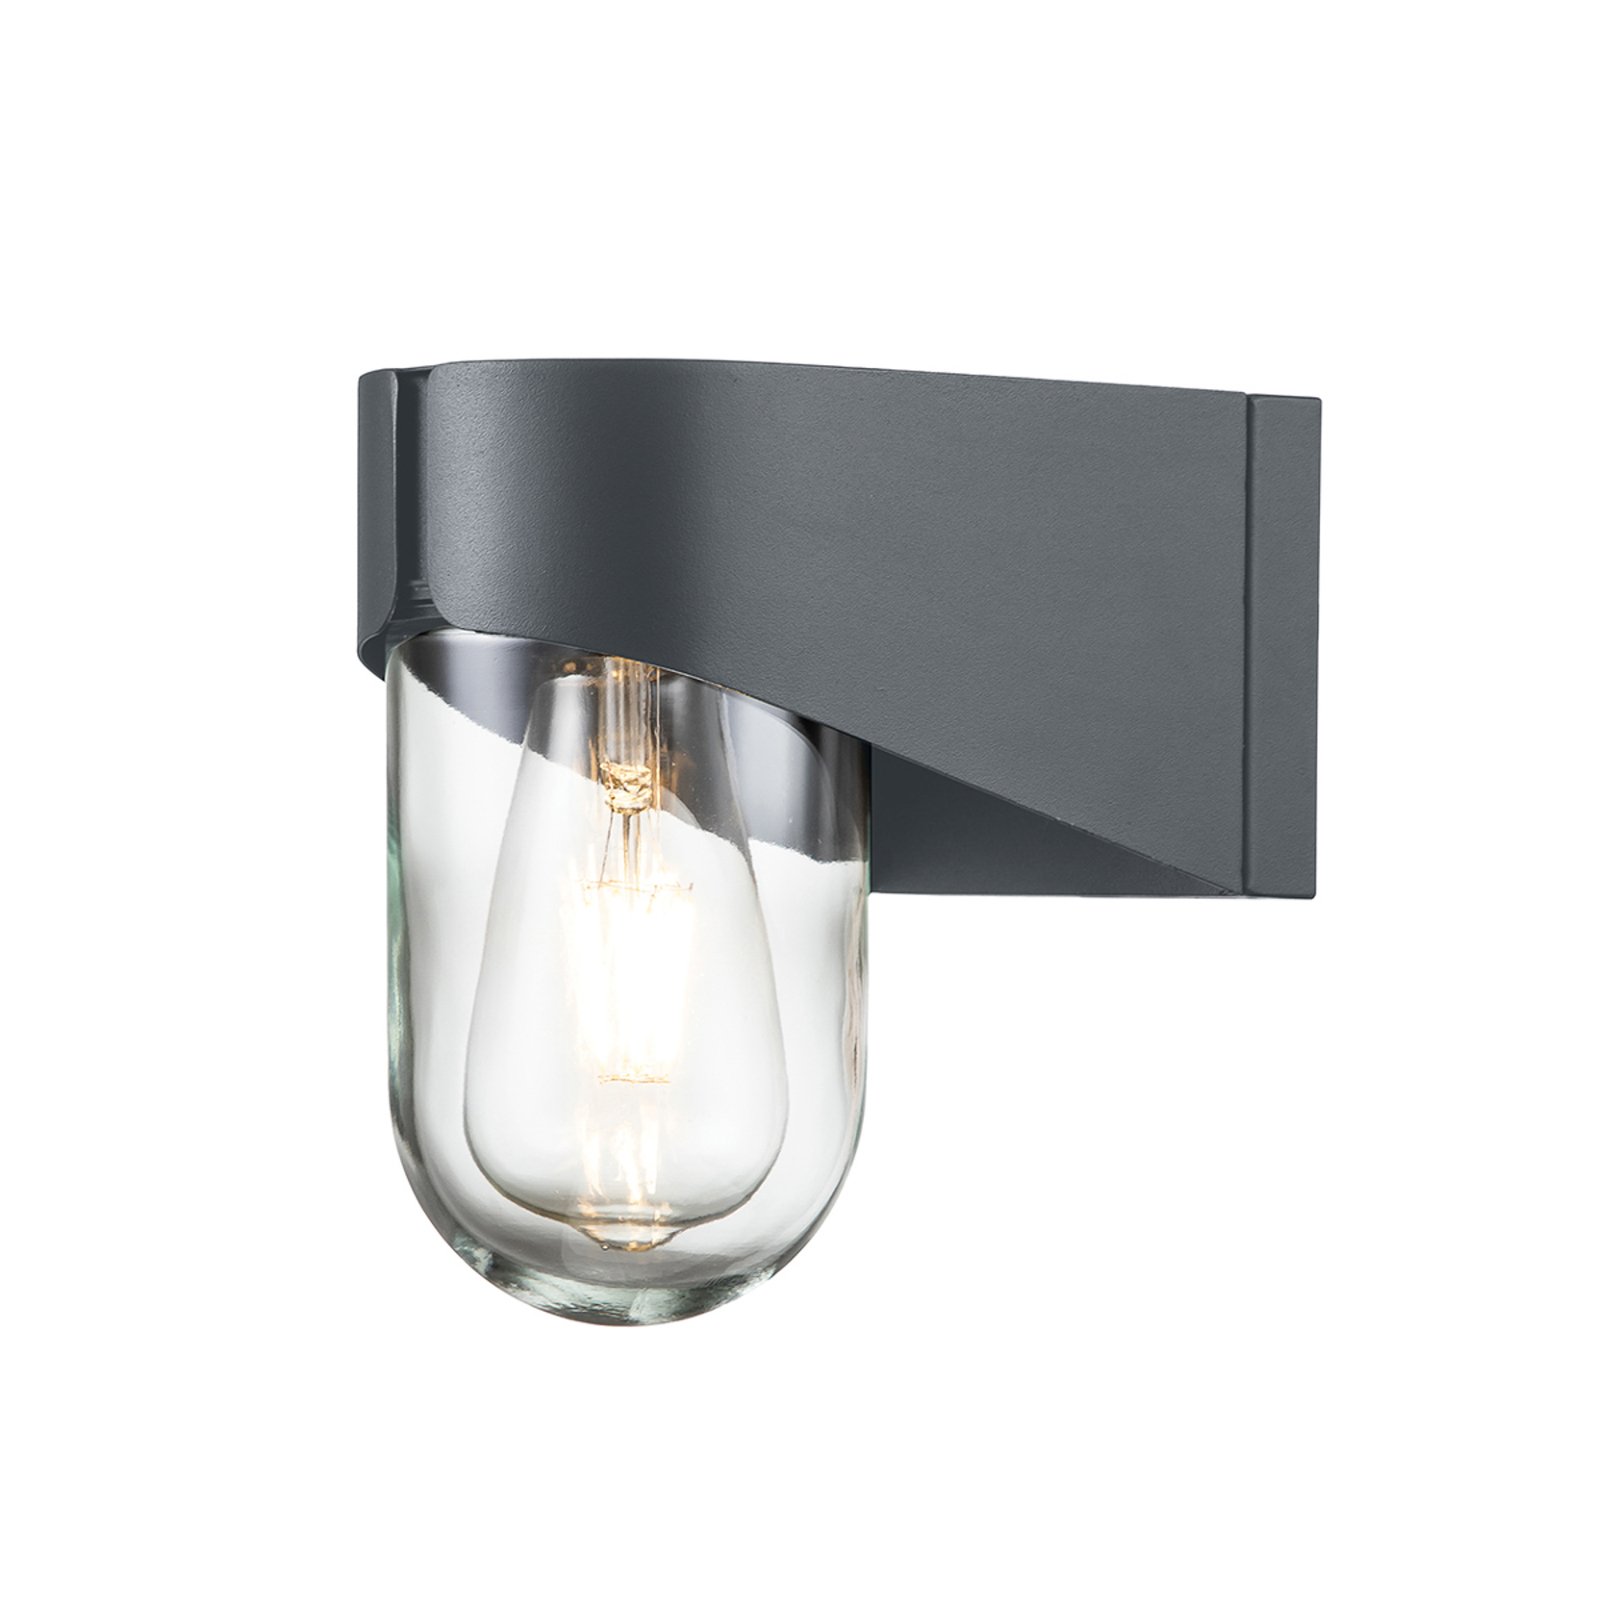 Porto outdoor wall light stainless steel, grey